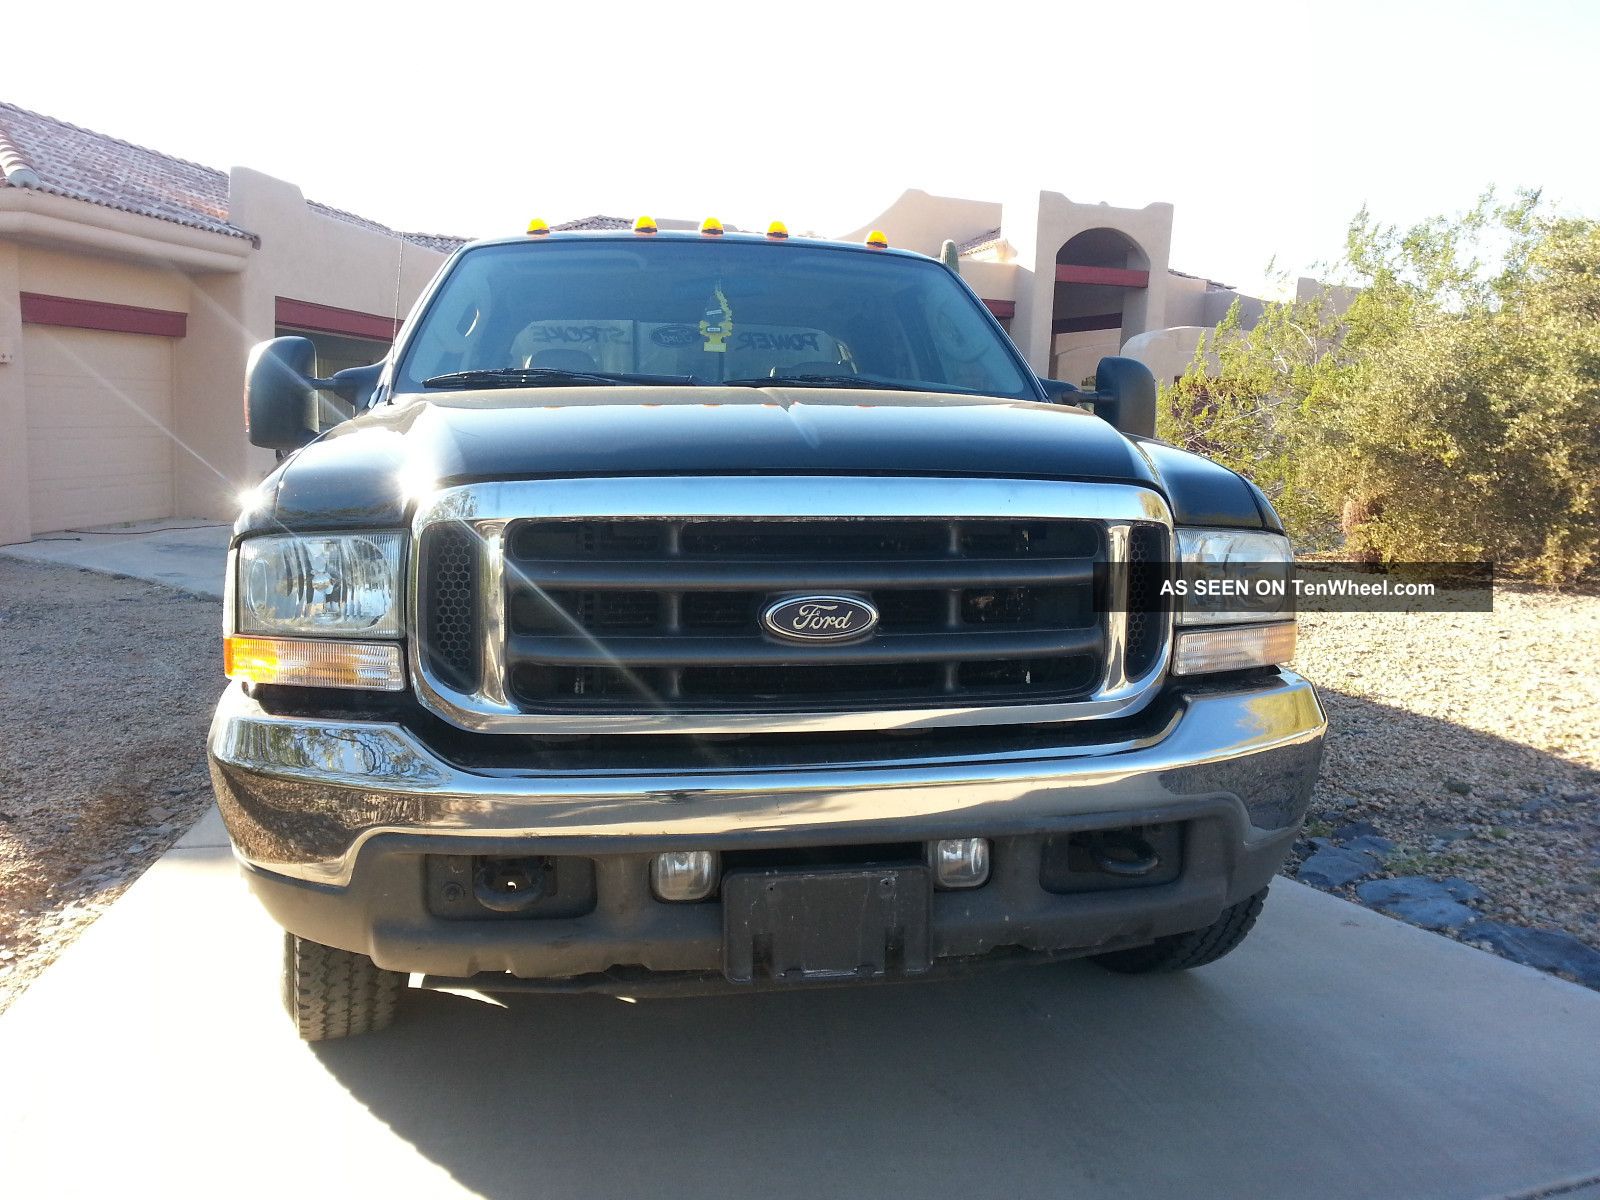 2004 Ford F350 Lariat Le Turbo Diesel Crew Cab Rwd Automatic Long Bed